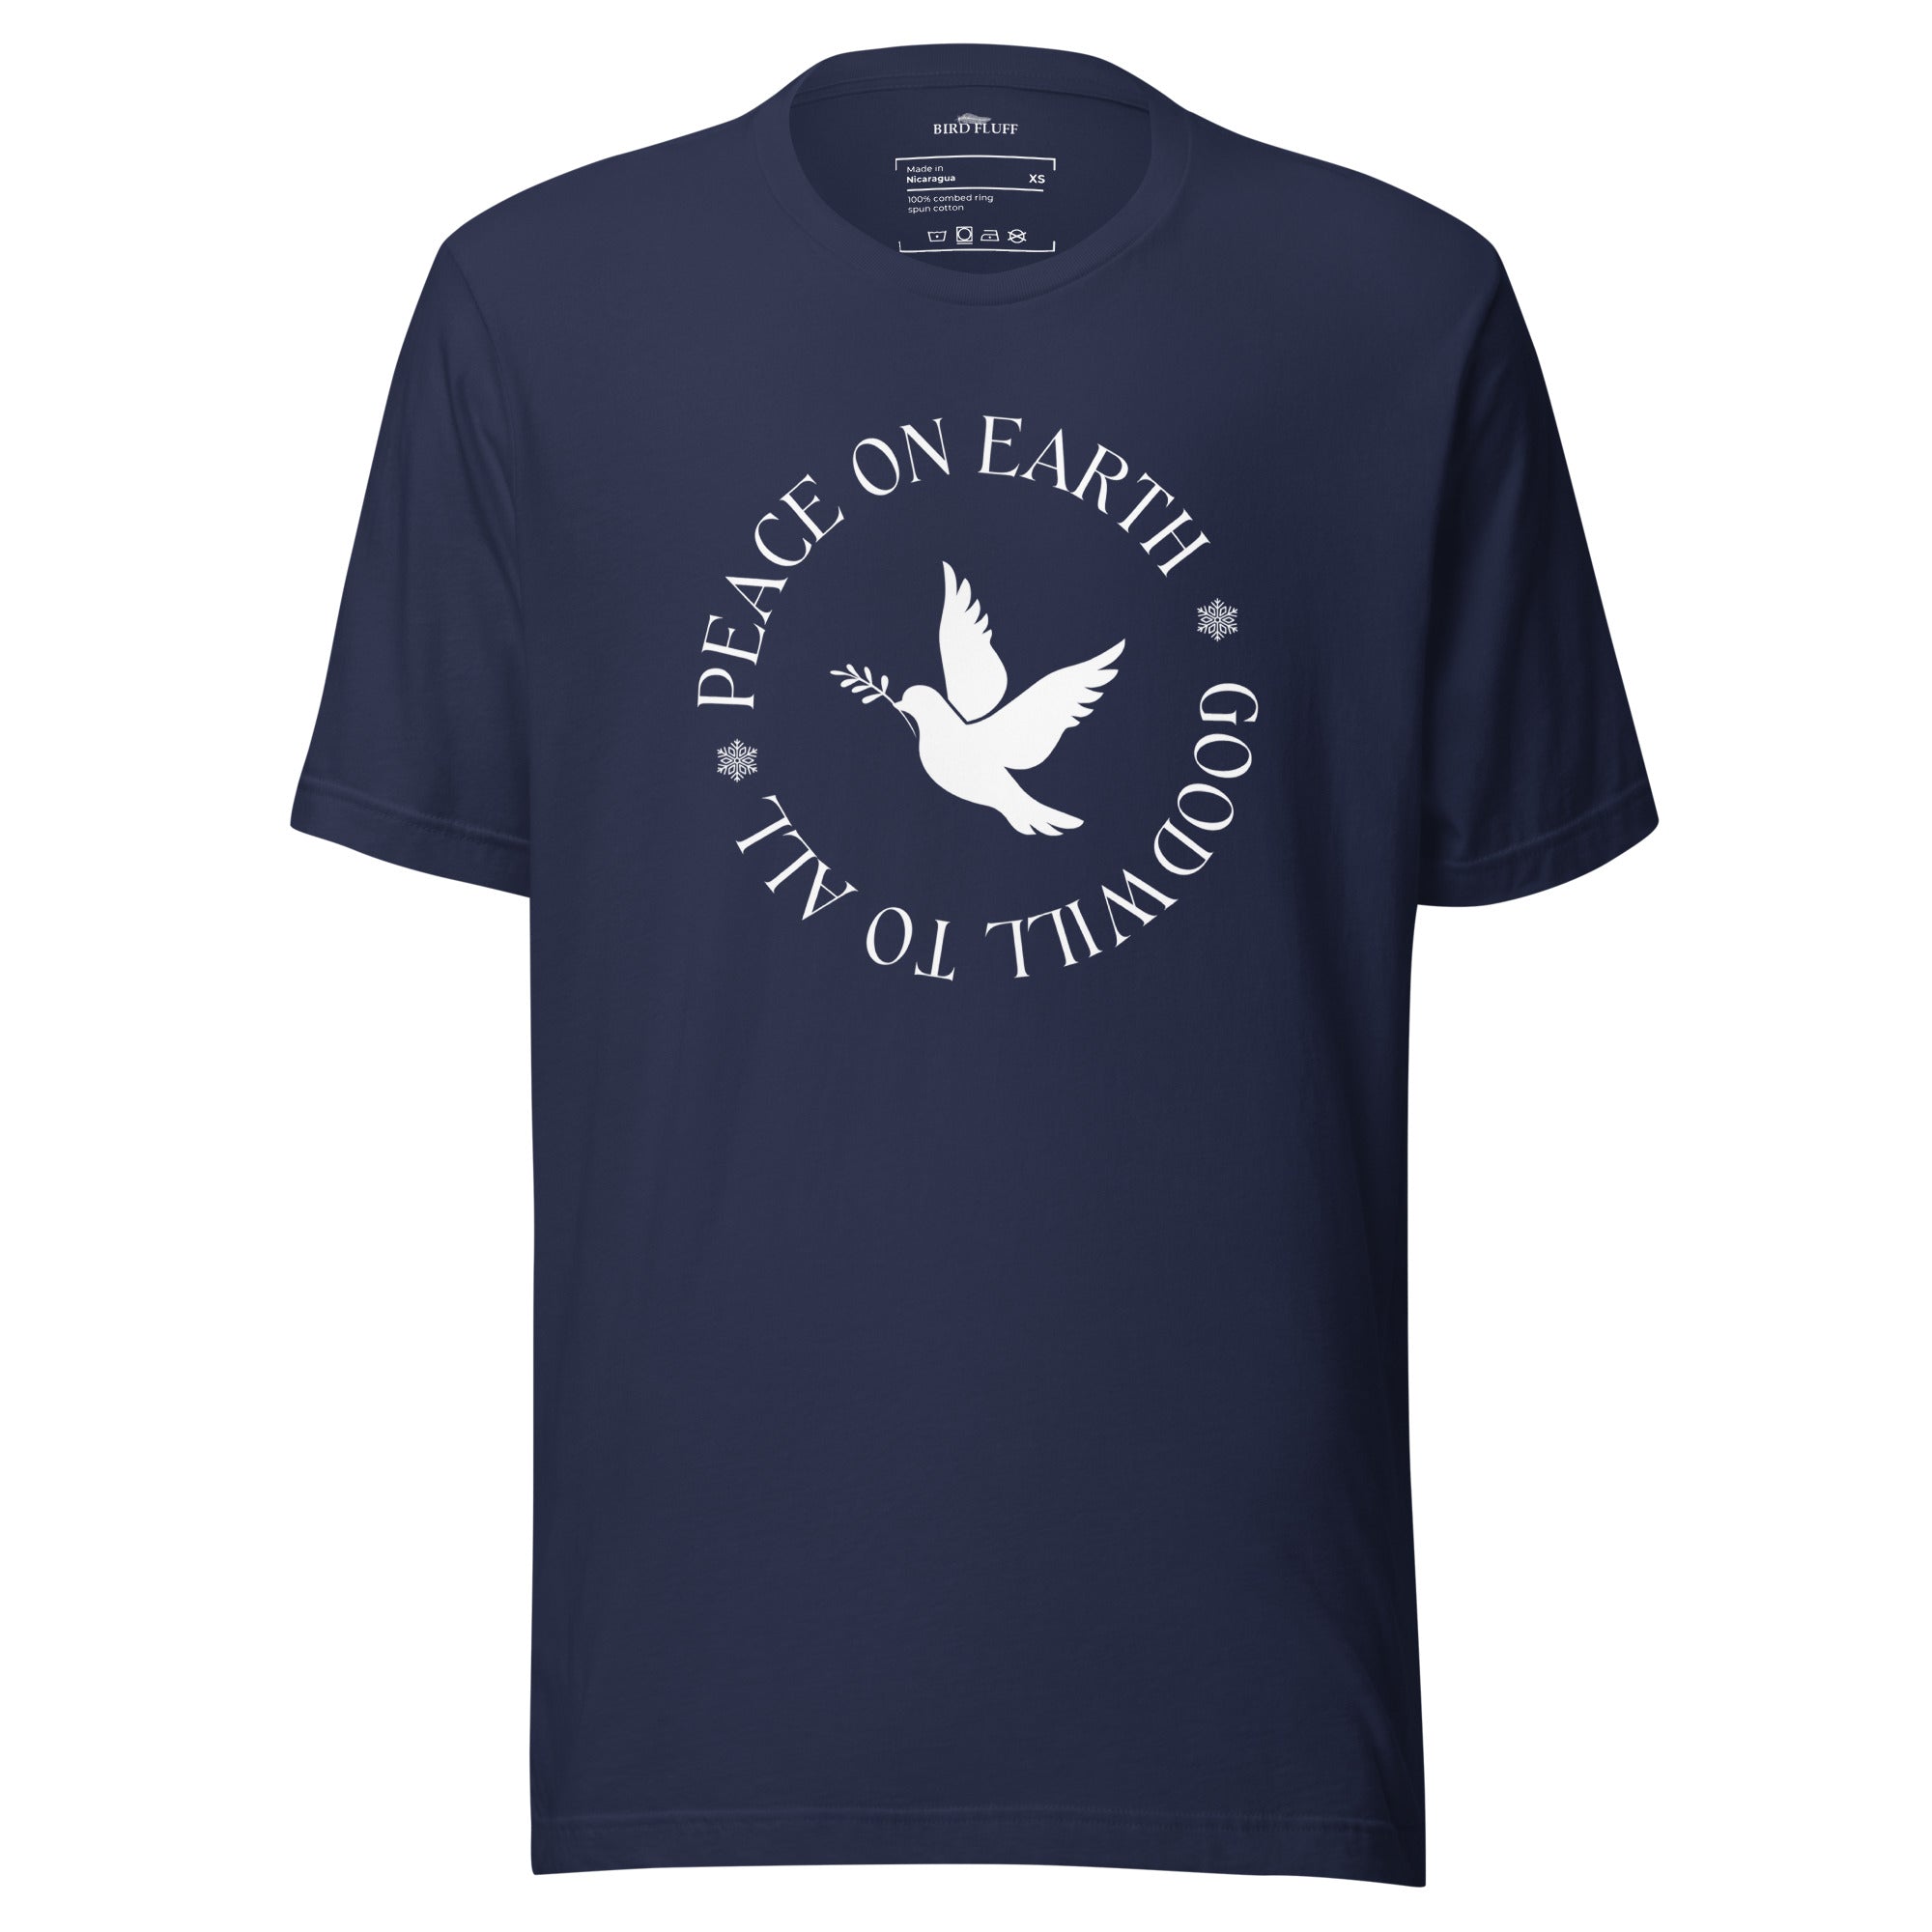 Winter Is for the Birds Long-sleeve T-shirt